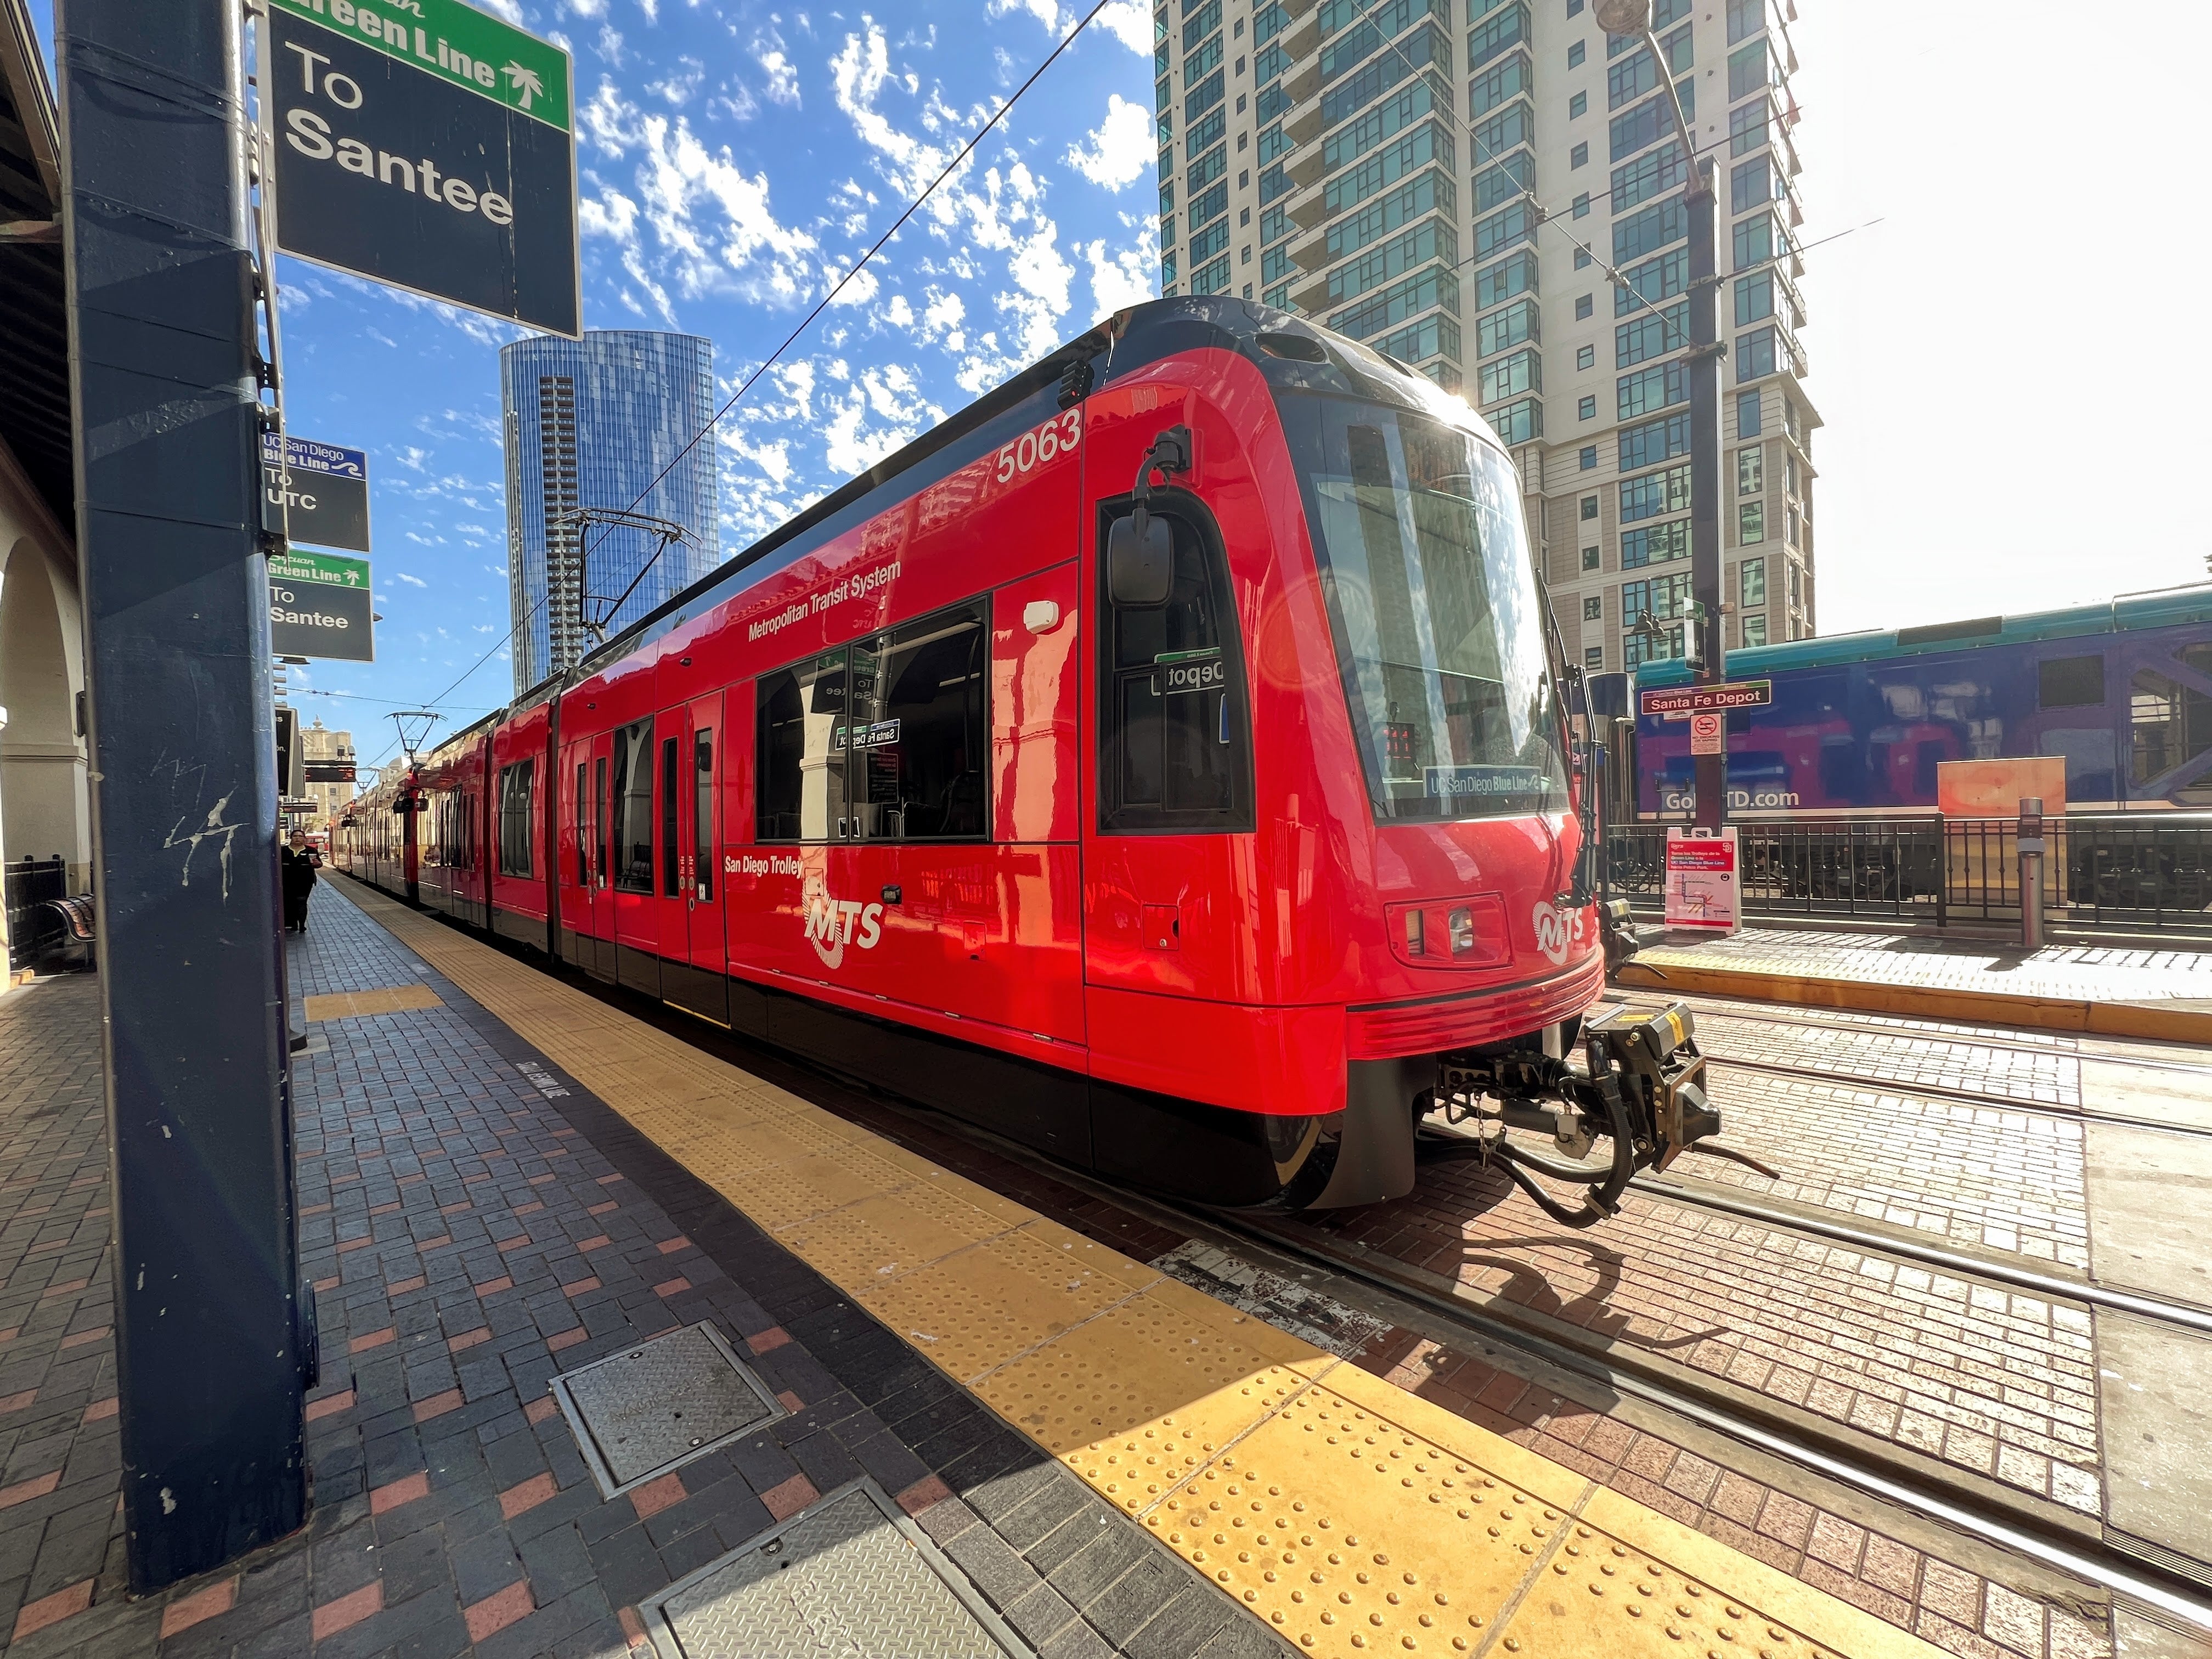 San Diego's trolley system makes getting around simple